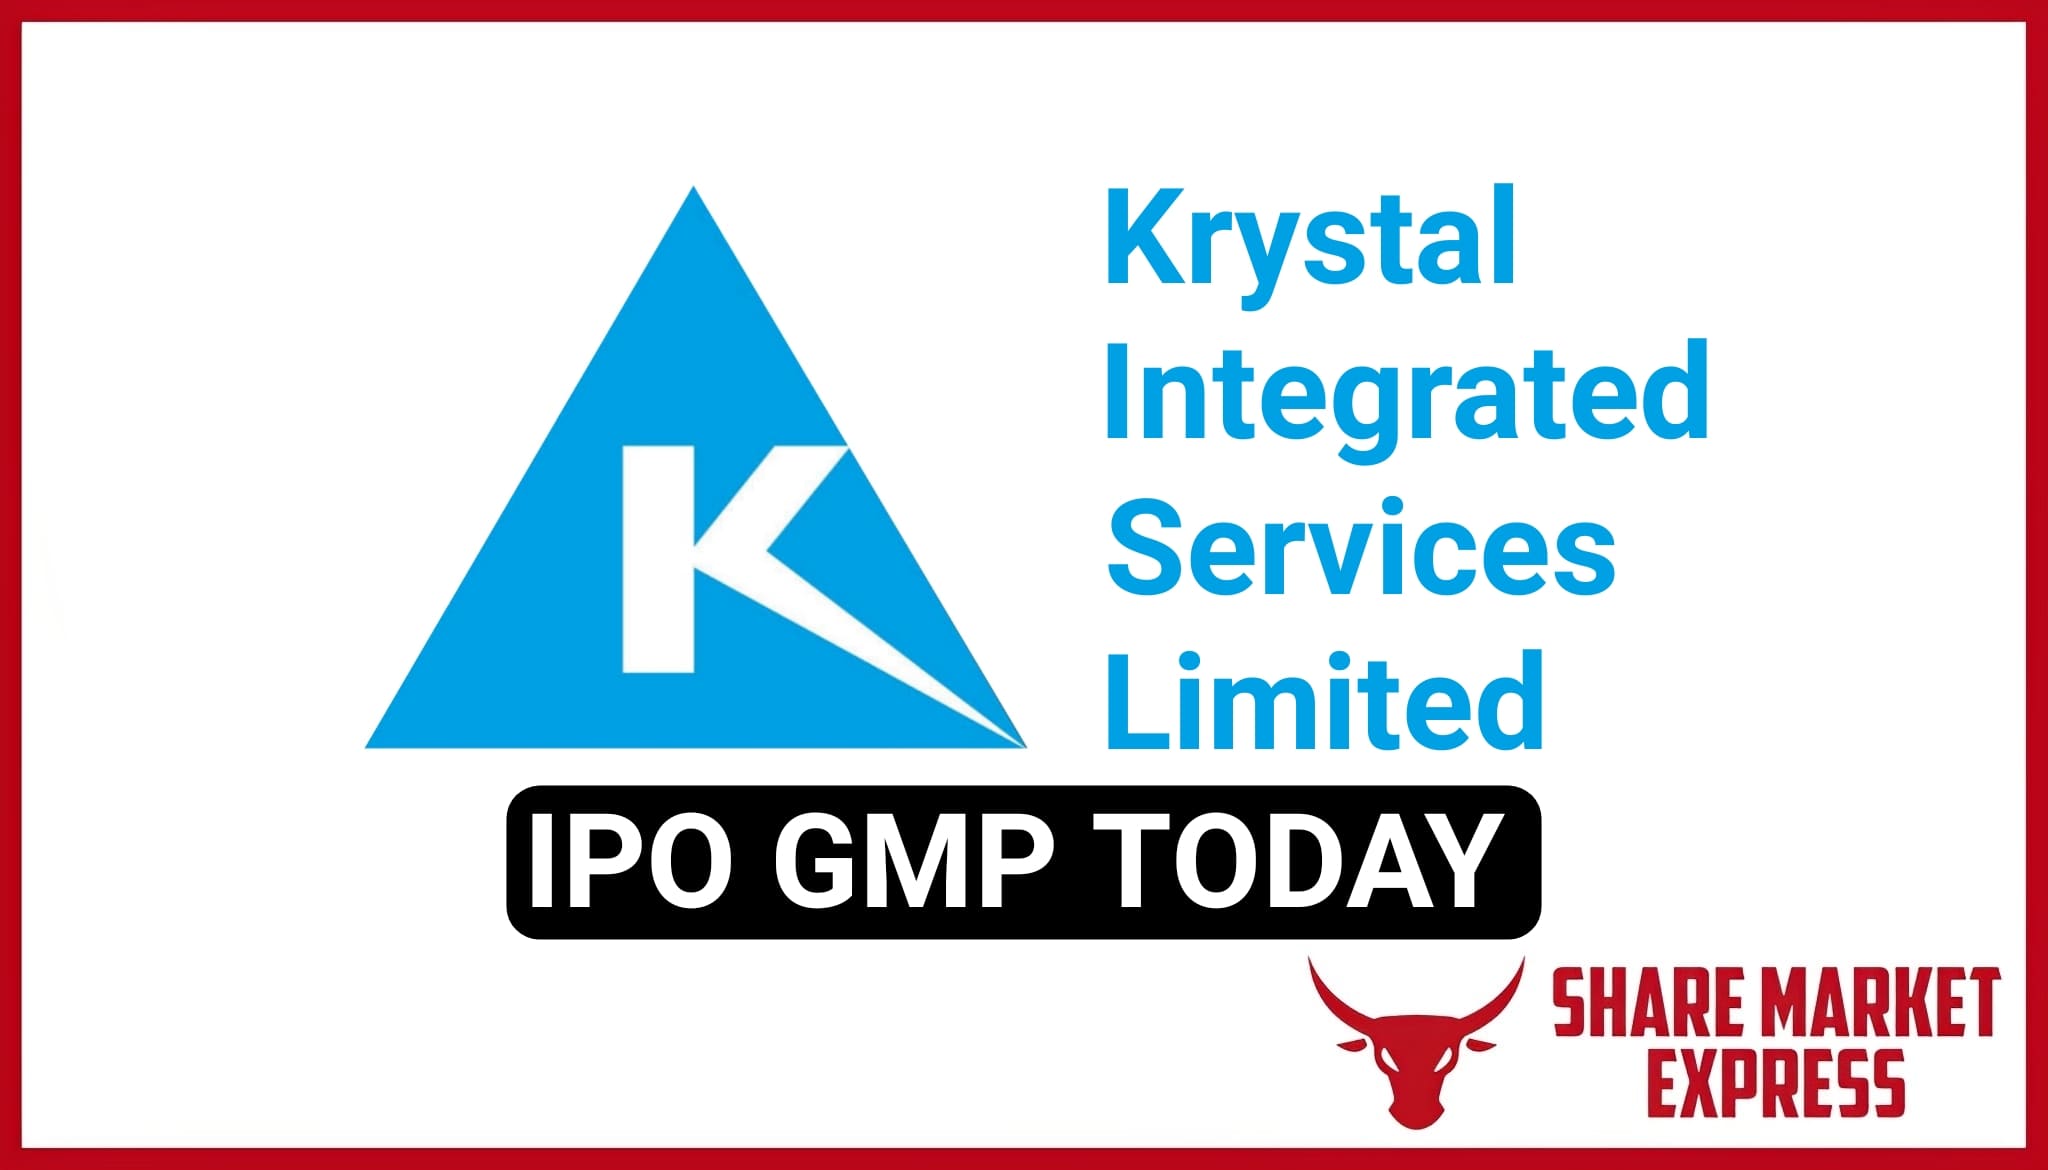 Krystal Integrated Services Limited IPO Krystal Integrated Services IPO Krystal Integrated IPO Krystal IPO